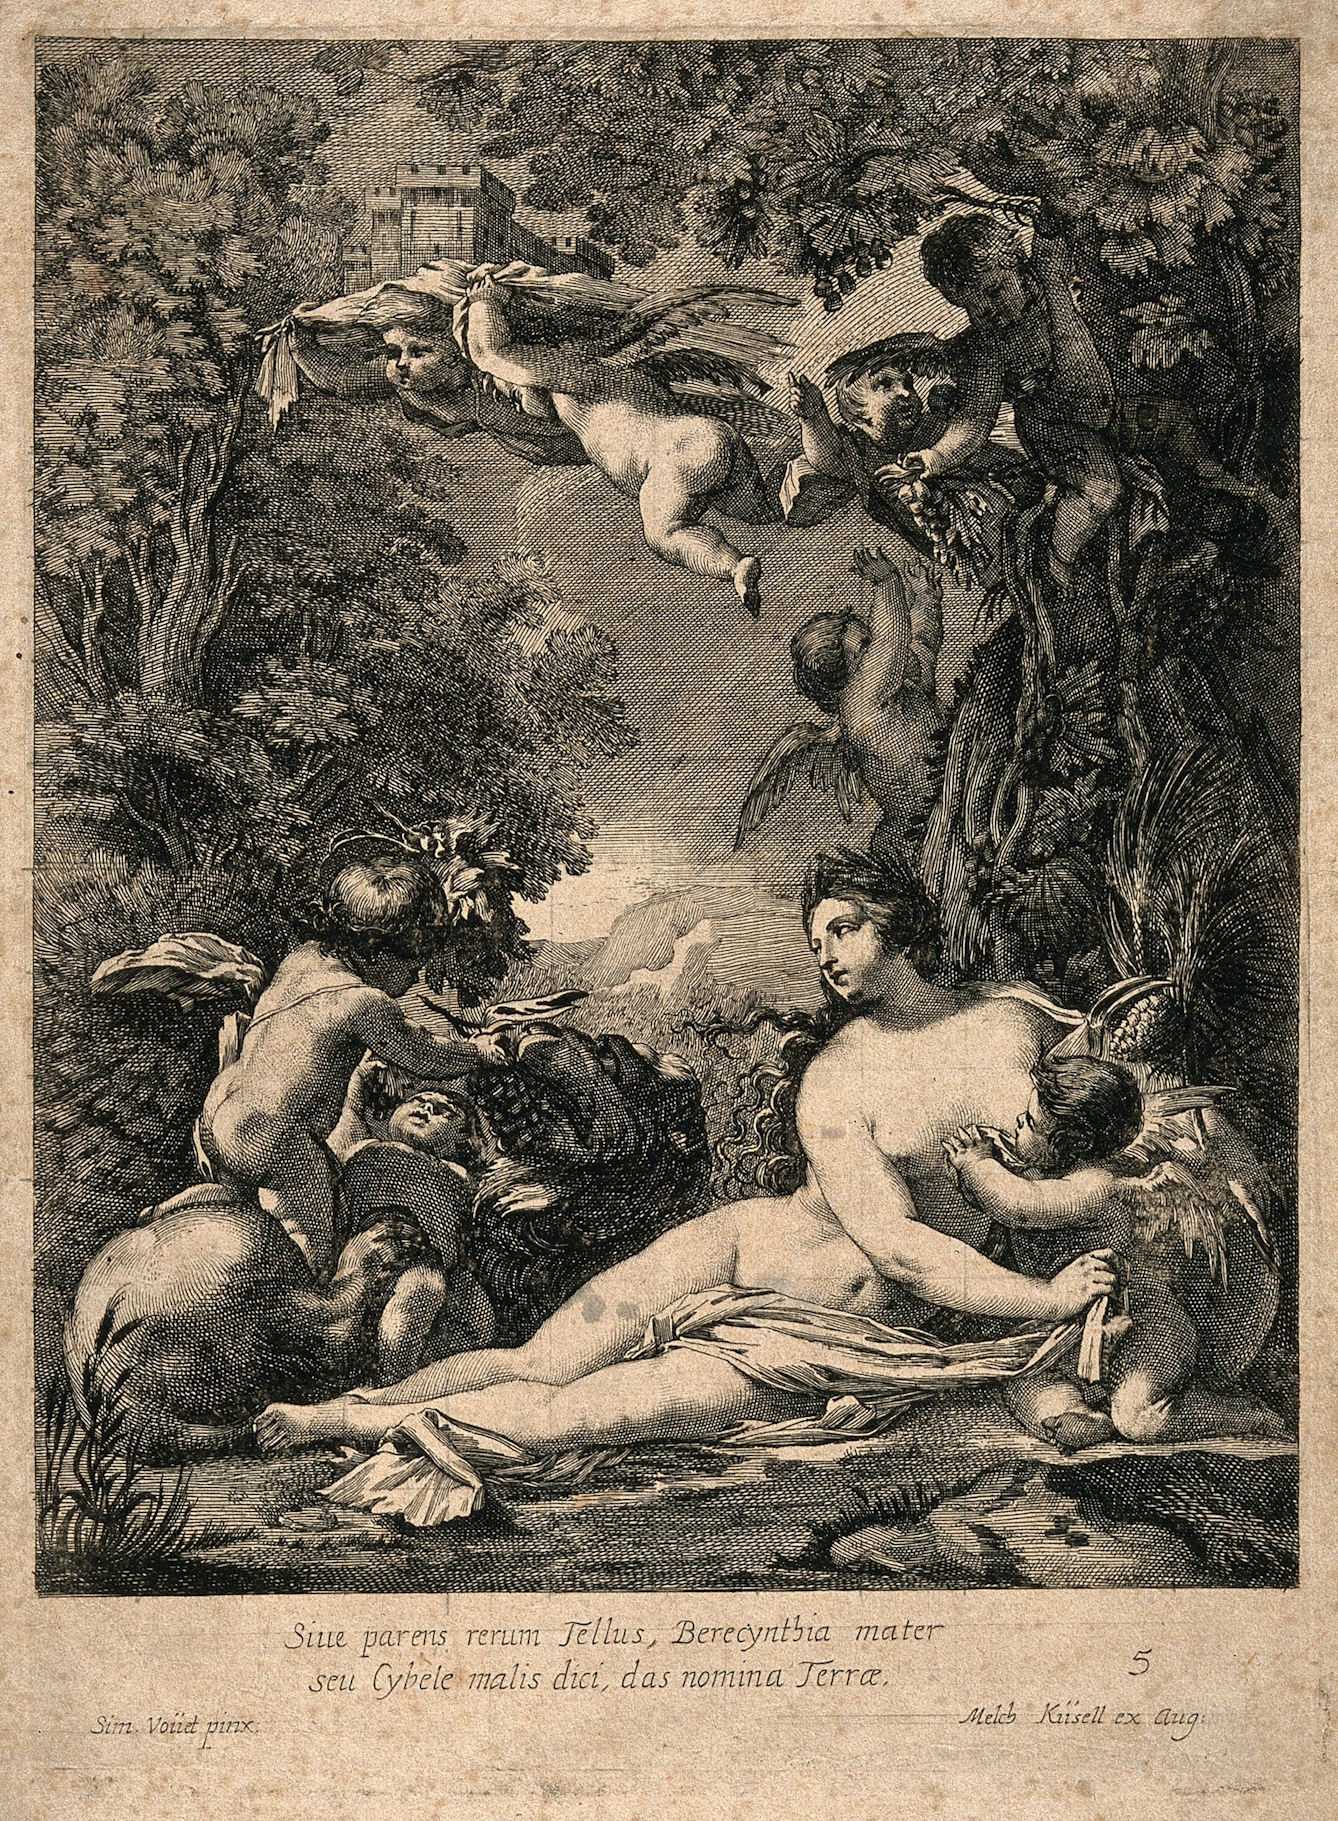 Black and white engraving showing a naked woman surrounded by putto playing beside a lion and in the branches of a tree. One putto flies above with a model of a castle on its shoulders.